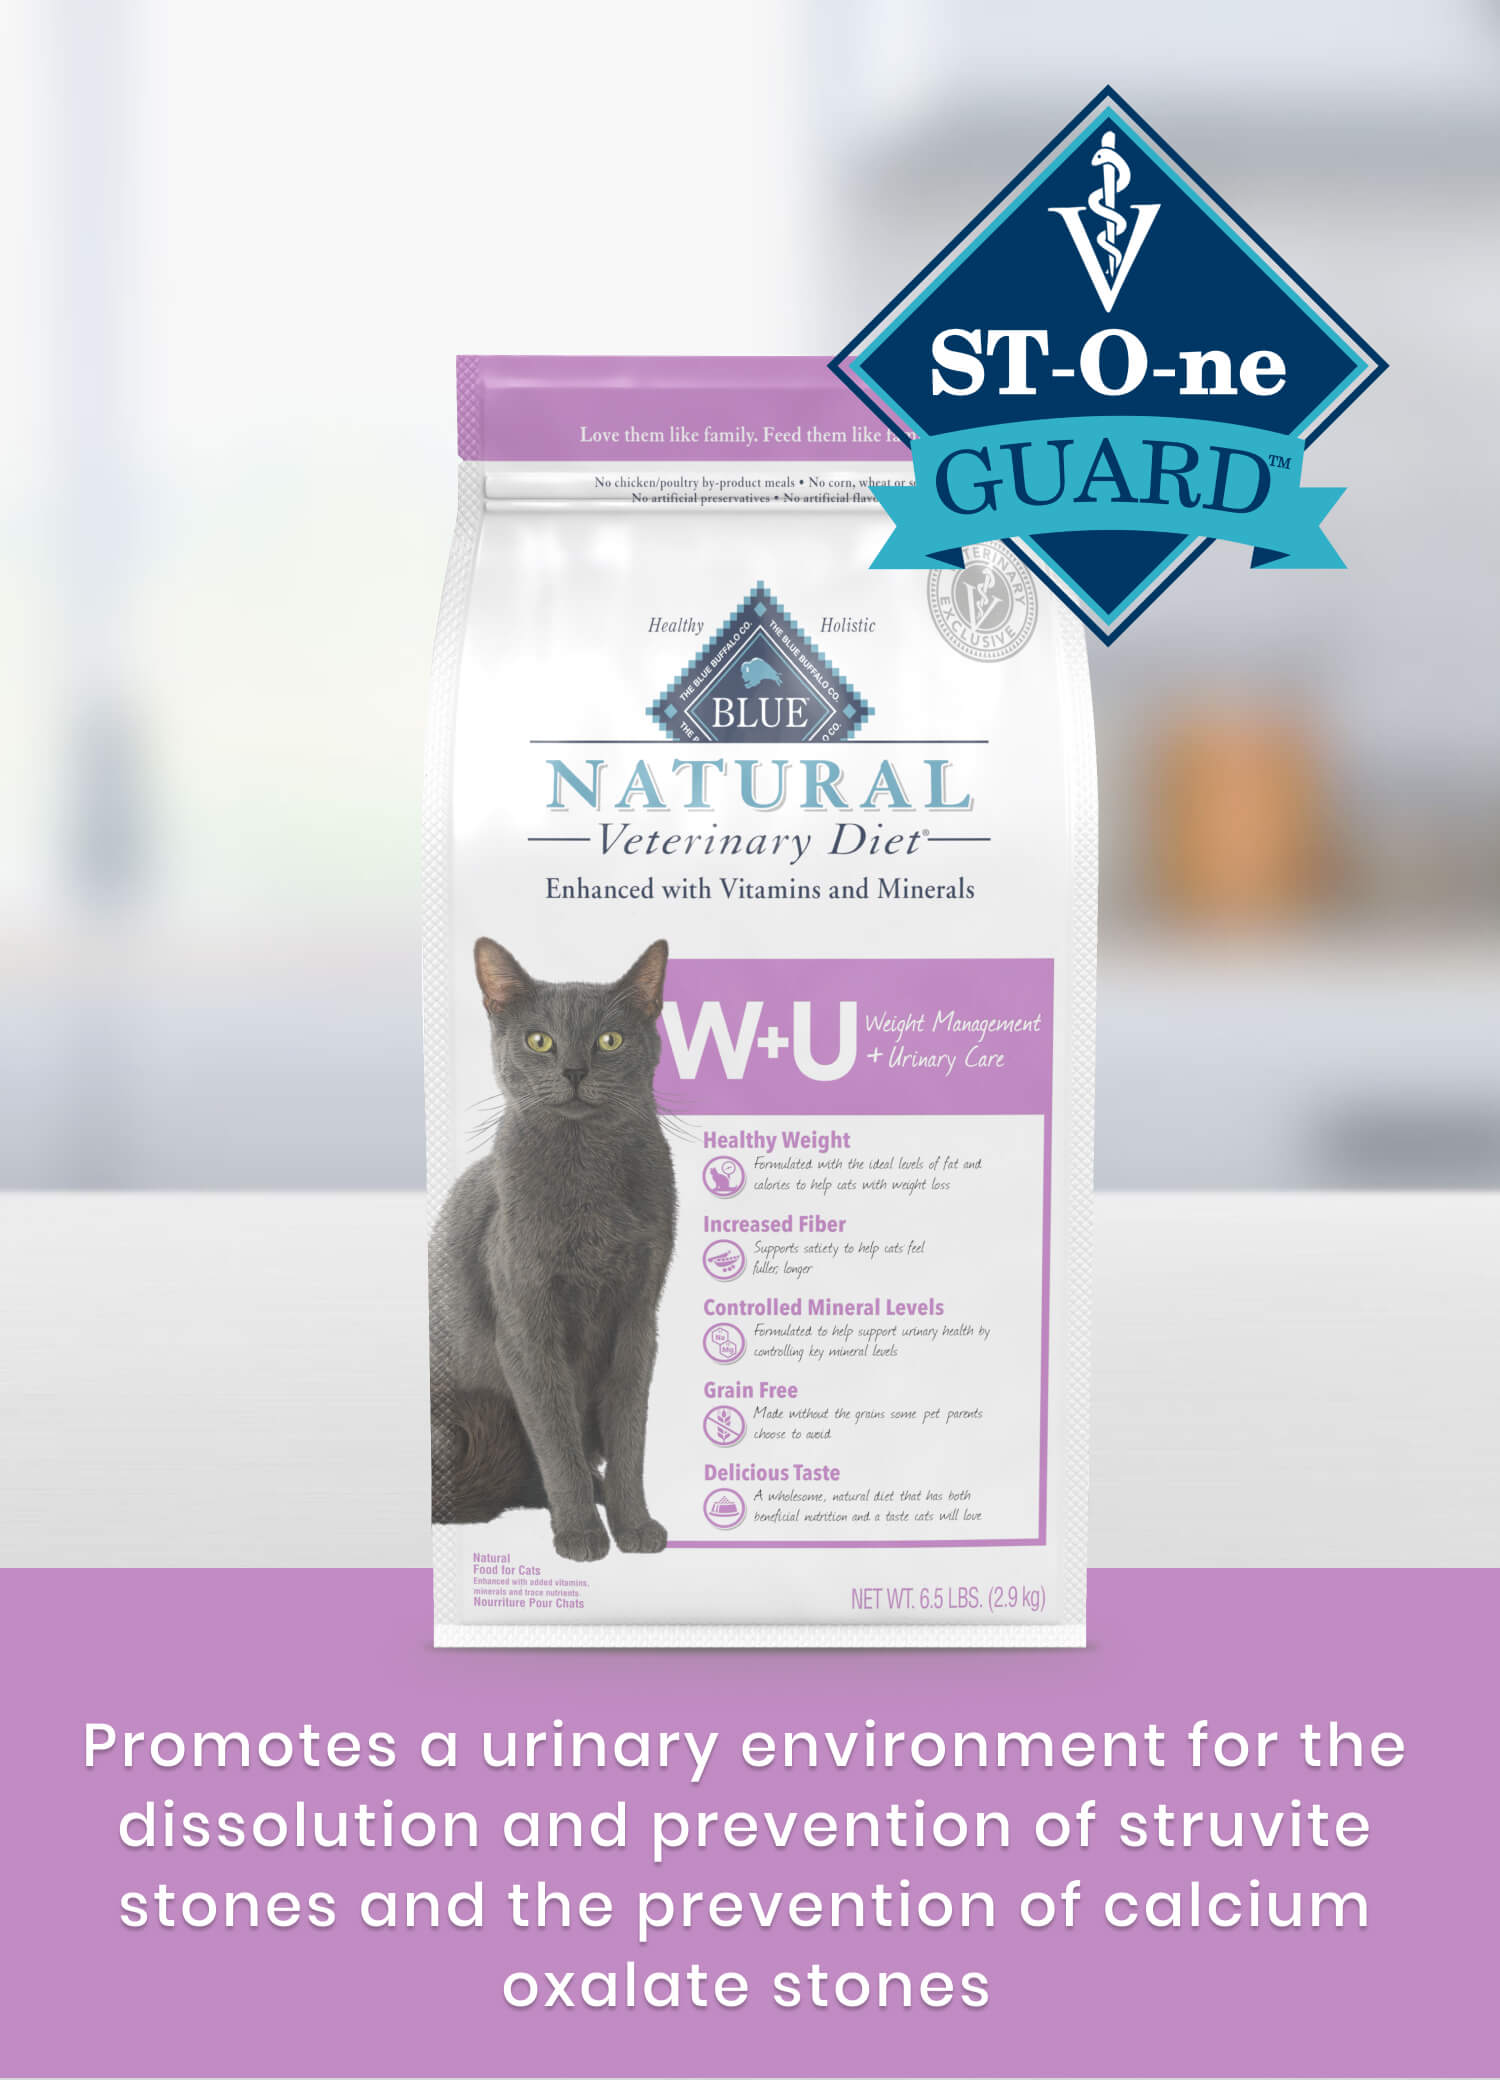 W+U Weight Management + Urinary Care St-O-ne Guard Promotes a urinary environment for the dissolution and prevention of struvite stones and the prevention of calcium oxalate stones